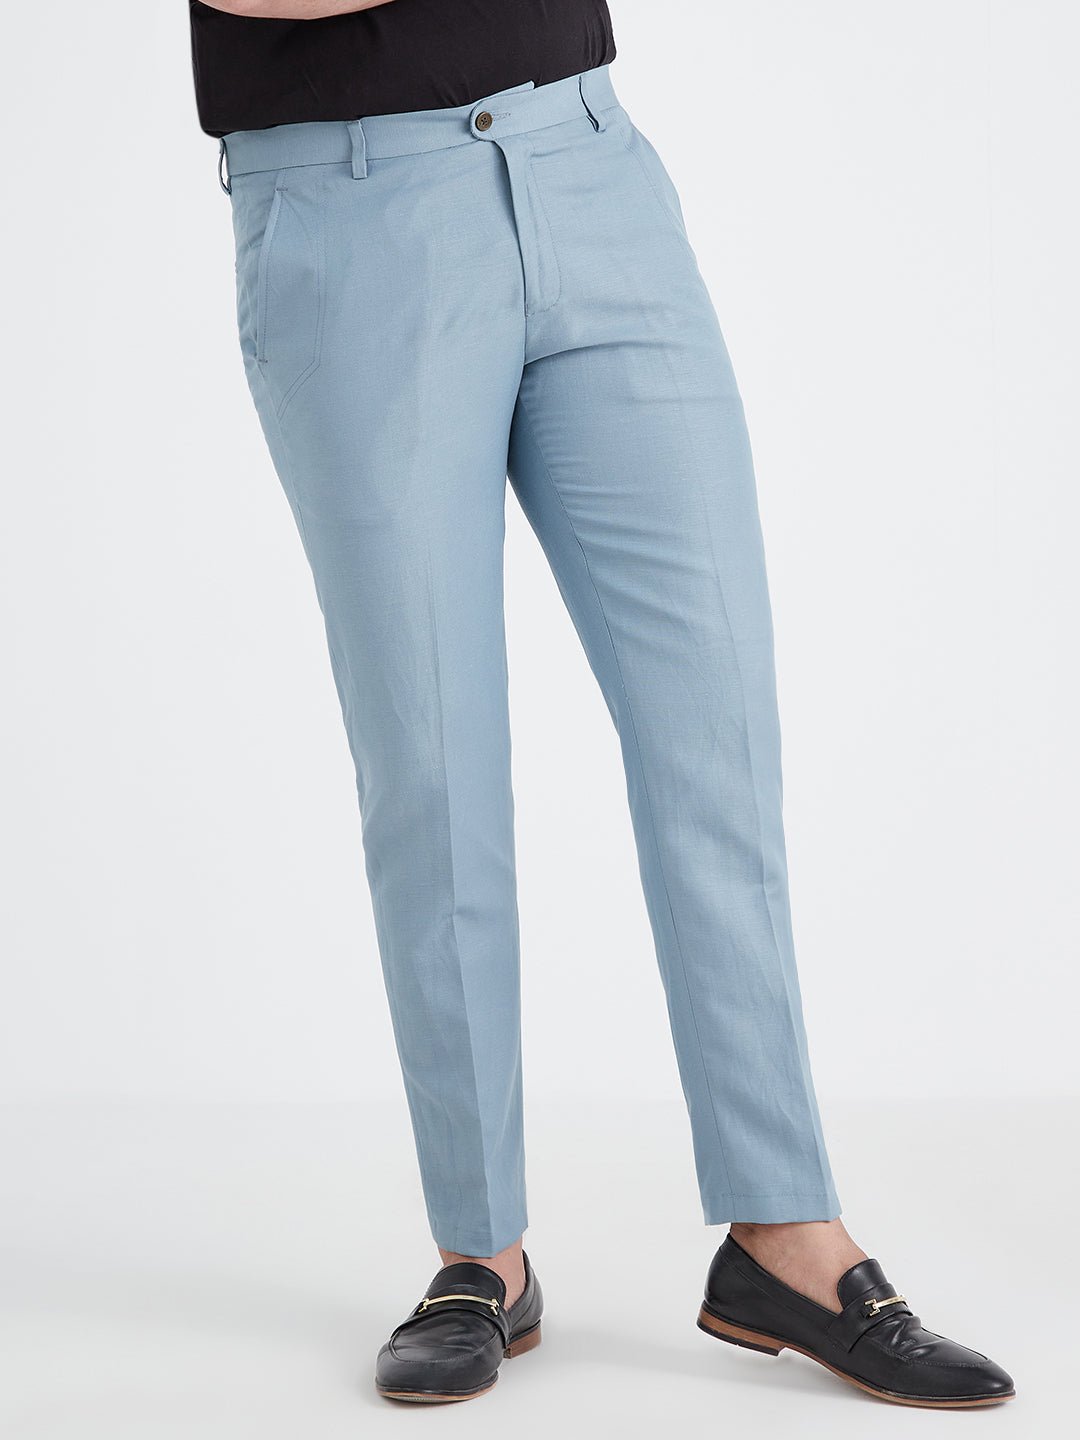 Tailored Trousers: The Perfect Blend of Style and Comfort